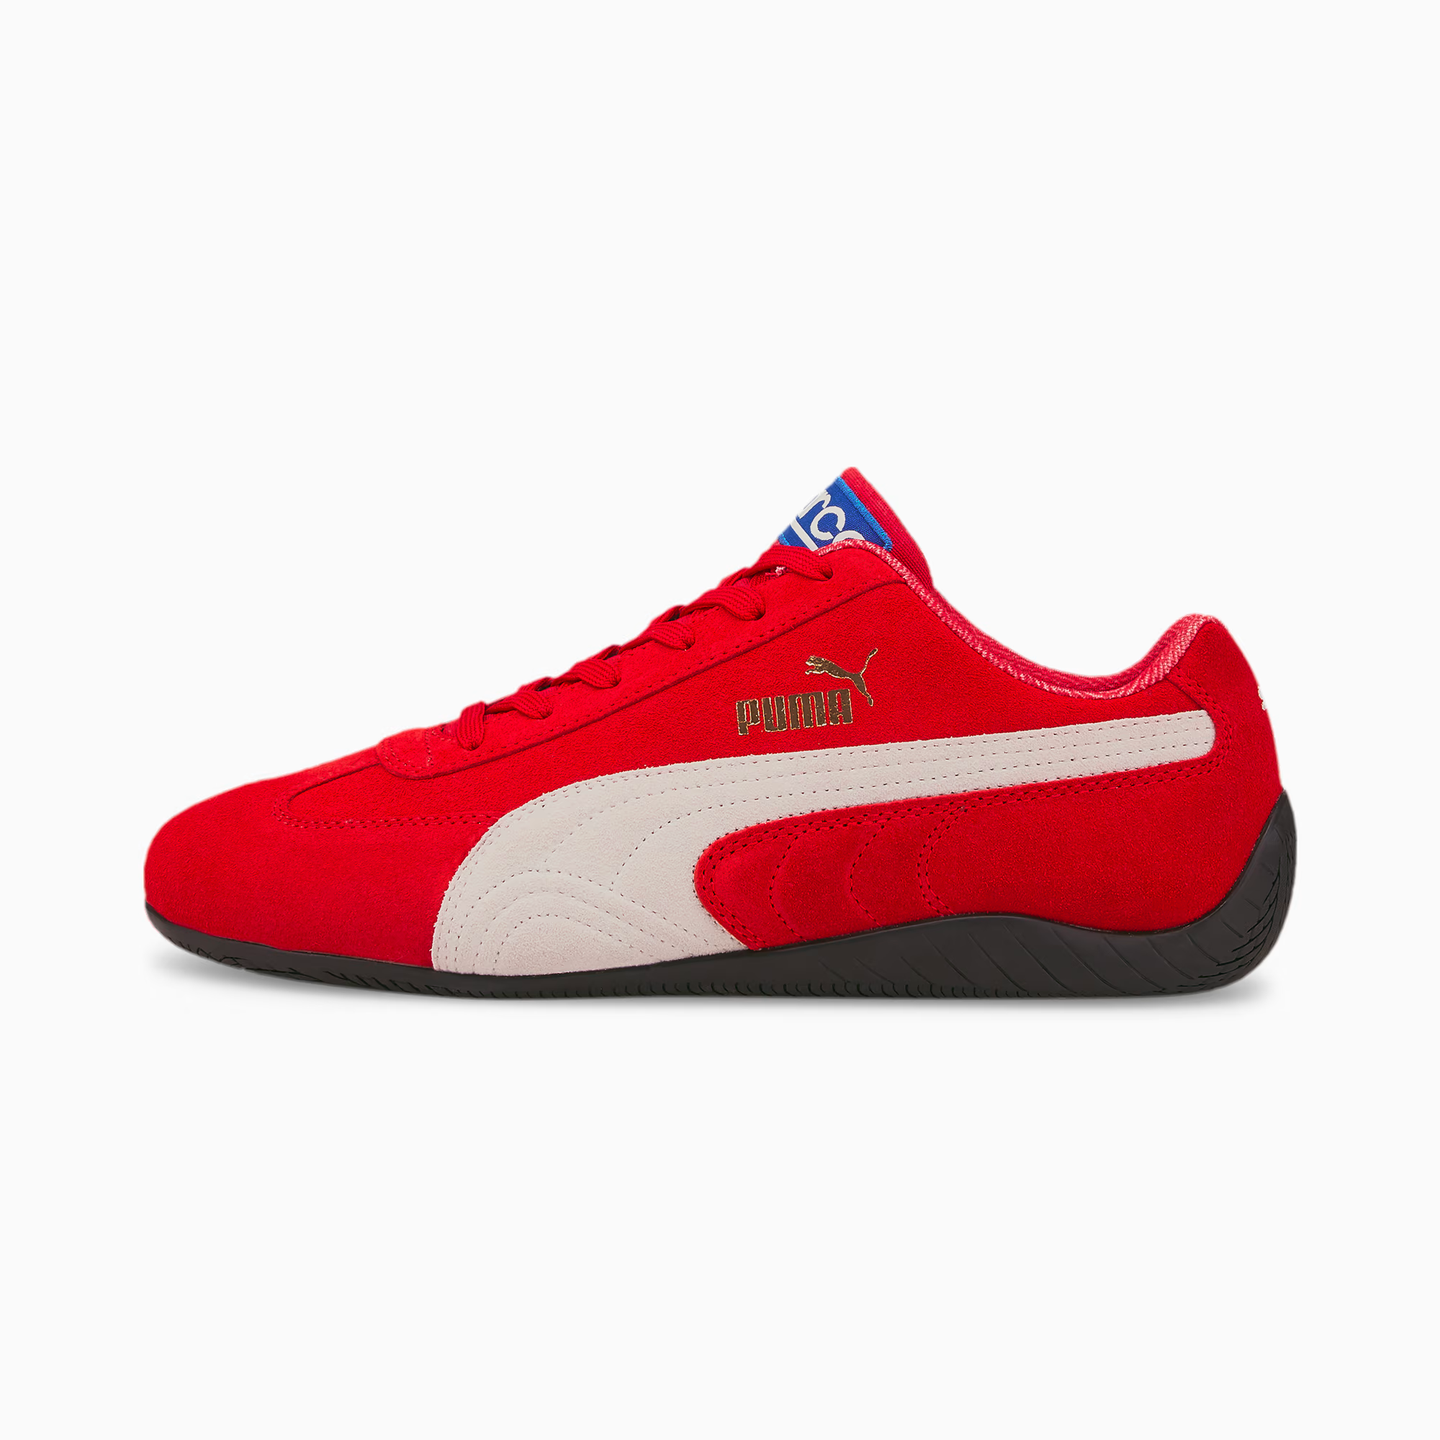 a pair of red and white puma shoes on a white background​​​​‌﻿‍﻿​‍​‍‌‍﻿﻿‌﻿​‍‌‍‍‌‌‍‌﻿‌‍‍‌‌‍﻿‍​‍​‍​﻿‍‍​‍​‍‌﻿​﻿‌‍​‌‌‍﻿‍‌‍‍‌‌﻿‌​‌﻿‍‌​‍﻿‍‌‍‍‌‌‍﻿﻿​‍​‍​‍﻿​​‍​‍‌‍‍​‌﻿​‍‌‍‌‌‌‍‌‍​‍​‍​﻿‍‍​‍​‍‌‍‍​‌﻿‌​‌﻿‌​‌﻿​​​﻿‍‍​‍﻿﻿​‍﻿﻿‌‍﻿​‌‍﻿﻿‌‍​﻿‌‍​‌‌‍﻿​‌‍‍​‌‍﻿﻿‌﻿​﻿‌﻿‌​​﻿‍‍​﻿​﻿​﻿​﻿​﻿​﻿​﻿​﻿​‍﻿﻿‌‍‍‌‌‍﻿‍‌﻿‌​‌‍‌‌‌‍﻿‍‌﻿‌​​‍﻿﻿‌‍‌‌‌‍‌​‌‍‍‌‌﻿‌​​‍﻿﻿‌‍﻿‌‌‍﻿﻿‌‍‌​‌‍‌‌​﻿﻿‌‌﻿​​‌﻿​‍‌‍‌‌‌﻿​﻿‌‍‌‌‌‍﻿‍‌﻿‌​‌‍​‌‌﻿‌​‌‍‍‌‌‍﻿﻿‌‍﻿‍​﻿‍﻿‌‍‍‌‌‍‌​​﻿﻿‌​﻿​​​﻿‌​‌‍‌‌‌‍‌‌‌‍‌‌​﻿​​​﻿​﻿​﻿​‍​‍﻿‌​﻿‌​‌‍‌‌​﻿‌﻿​﻿‍‌​‍﻿‌​﻿‌​​﻿‌‍​﻿‍‌​﻿​‌​‍﻿‌‌‍​‍‌‍​‌​﻿‍​‌‍‌​​‍﻿‌​﻿​‍​﻿​﻿‌‍‌​​﻿‌​​﻿​​​﻿​﻿​﻿‌​​﻿​​​﻿‌​​﻿‌​​﻿‌‍​﻿​‍​﻿‍﻿‌﻿‌​‌﻿‍‌‌﻿​​‌‍‌‌​﻿﻿‌‌﻿​﻿‌‍‍​‌‍﻿﻿‌‍‌‌​﻿‍﻿‌﻿​​‌‍​‌‌﻿‌​‌‍‍​​﻿﻿‌‌‍﻿‌‌‍‌‌‌‍‌​‌‍‍‌‌‍​‌​‍‌‌​﻿‌‌‌​​‍‌‌﻿﻿‌‍‍﻿‌‍‌‌‌﻿‍‌​‍‌‌​﻿​﻿‌​‌​​‍‌‌​﻿​﻿‌​‌​​‍‌‌​﻿​‍​﻿​‍‌‍‌​‌‍‌‌​﻿‌​​﻿​‍​﻿‌​​﻿‌﻿​﻿​​‌‍​‌​﻿‌‍‌‍‌​​﻿‌﻿‌‍‌‌​‍‌‌​﻿​‍​﻿​‍​‍‌‌​﻿‌‌‌​‌​​‍﻿‍‌‍​‌‌‍﻿​‌﻿‌​​﻿﻿﻿‌‍​‍‌‍​‌‌﻿​﻿‌‍‌‌‌‌‌‌‌﻿​‍‌‍﻿​​﻿﻿‌‌‍‍​‌﻿‌​‌﻿‌​‌﻿​​​‍‌‌​﻿​﻿‌​​‌​‍‌‌​﻿​‍‌​‌‍​‍‌‌​﻿​‍‌​‌‍‌‍﻿​‌‍﻿﻿‌‍​﻿‌‍​‌‌‍﻿​‌‍‍​‌‍﻿﻿‌﻿​﻿‌﻿‌​​‍‌‌​﻿​﻿‌​​‌​﻿​﻿​﻿​﻿​﻿​﻿​﻿​﻿​‍‌‍‌‍‍‌‌‍‌​​﻿﻿‌​﻿​​​﻿‌​‌‍‌‌‌‍‌‌‌‍‌‌​﻿​​​﻿​﻿​﻿​‍​‍﻿‌​﻿‌​‌‍‌‌​﻿‌﻿​﻿‍‌​‍﻿‌​﻿‌​​﻿‌‍​﻿‍‌​﻿​‌​‍﻿‌‌‍​‍‌‍​‌​﻿‍​‌‍‌​​‍﻿‌​﻿​‍​﻿​﻿‌‍‌​​﻿‌​​﻿​​​﻿​﻿​﻿‌​​﻿​​​﻿‌​​﻿‌​​﻿‌‍​﻿​‍​‍‌‍‌﻿‌​‌﻿‍‌‌﻿​​‌‍‌‌​﻿﻿‌‌﻿​﻿‌‍‍​‌‍﻿﻿‌‍‌‌​‍‌‍‌﻿​​‌‍​‌‌﻿‌​‌‍‍​​﻿﻿‌‌‍﻿‌‌‍‌‌‌‍‌​‌‍‍‌‌‍​‌​‍‌‌​﻿‌‌‌​​‍‌‌﻿﻿‌‍‍﻿‌‍‌‌‌﻿‍‌​‍‌‌​﻿​﻿‌​‌​​‍‌‌​﻿​﻿‌​‌​​‍‌‌​﻿​‍​﻿​‍‌‍‌​‌‍‌‌​﻿‌​​﻿​‍​﻿‌​​﻿‌﻿​﻿​​‌‍​‌​﻿‌‍‌‍‌​​﻿‌﻿‌‍‌‌​‍‌‌​﻿​‍​﻿​‍​‍‌‌​﻿‌‌‌​‌​​‍﻿‍‌‍​‌‌‍﻿​‌﻿‌​​‍​‍‌﻿﻿‌